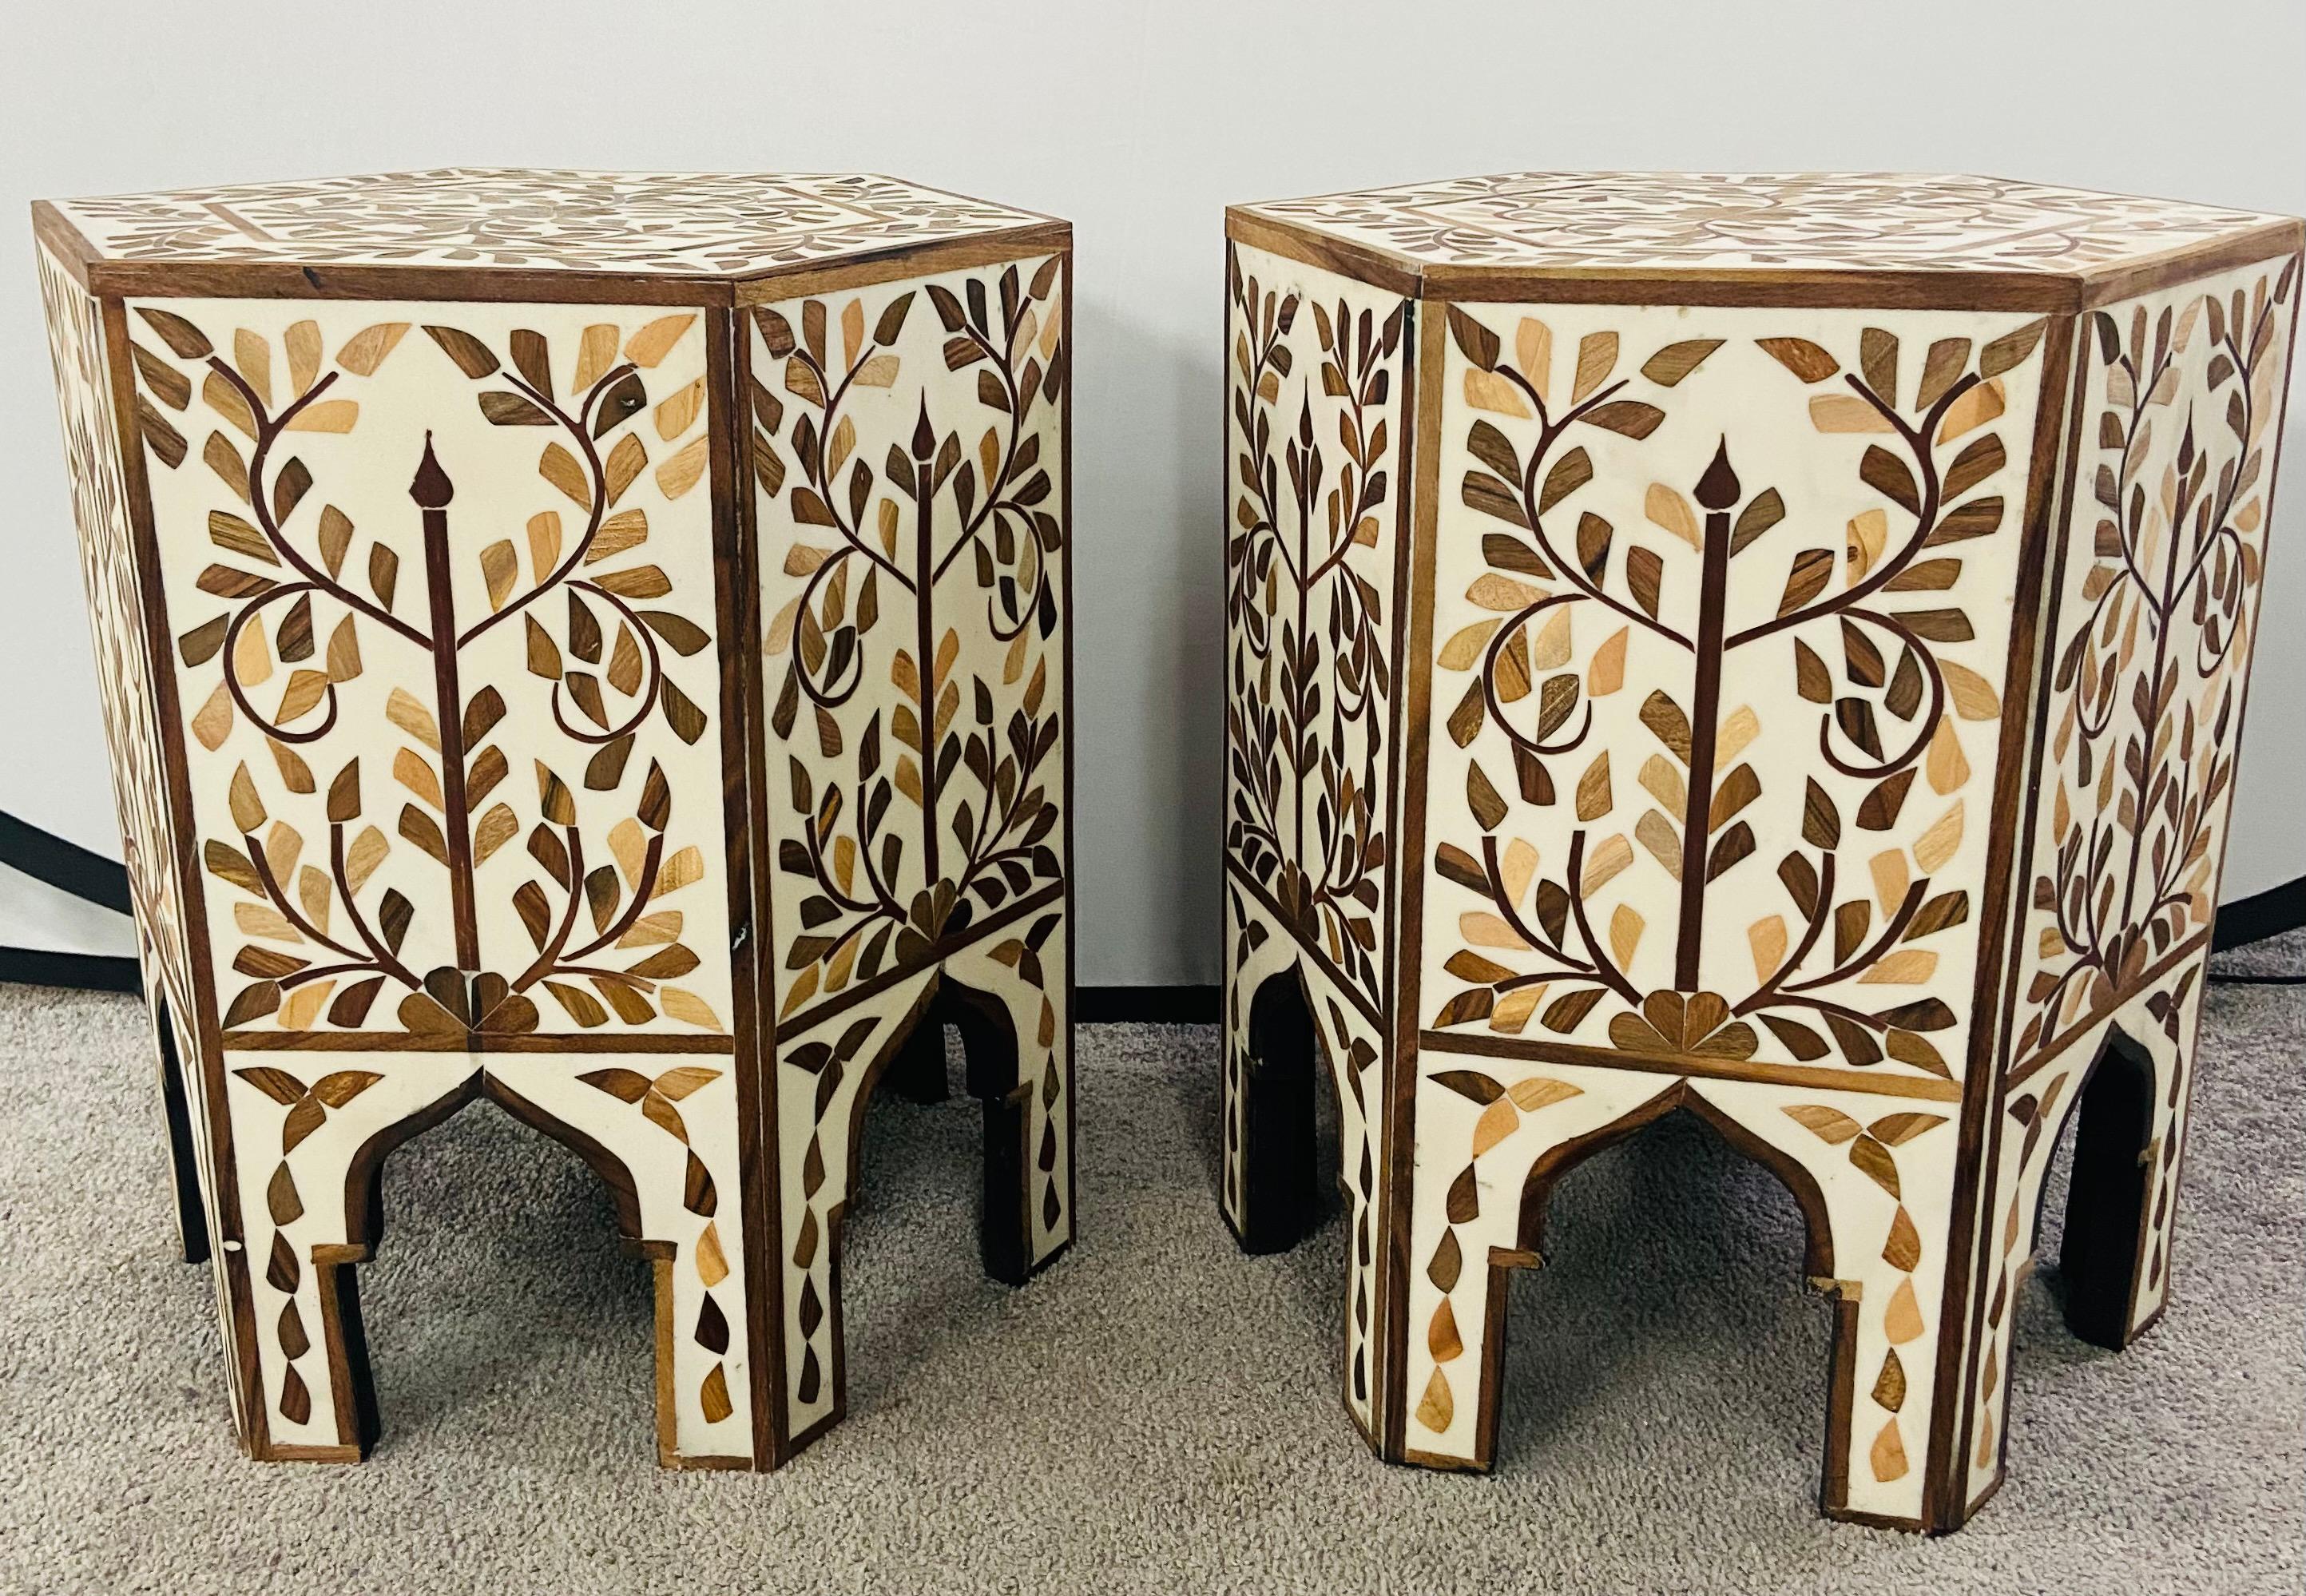 Moorish Moroccan Hexagonal Side, End Table with Leaf Design, a Pair